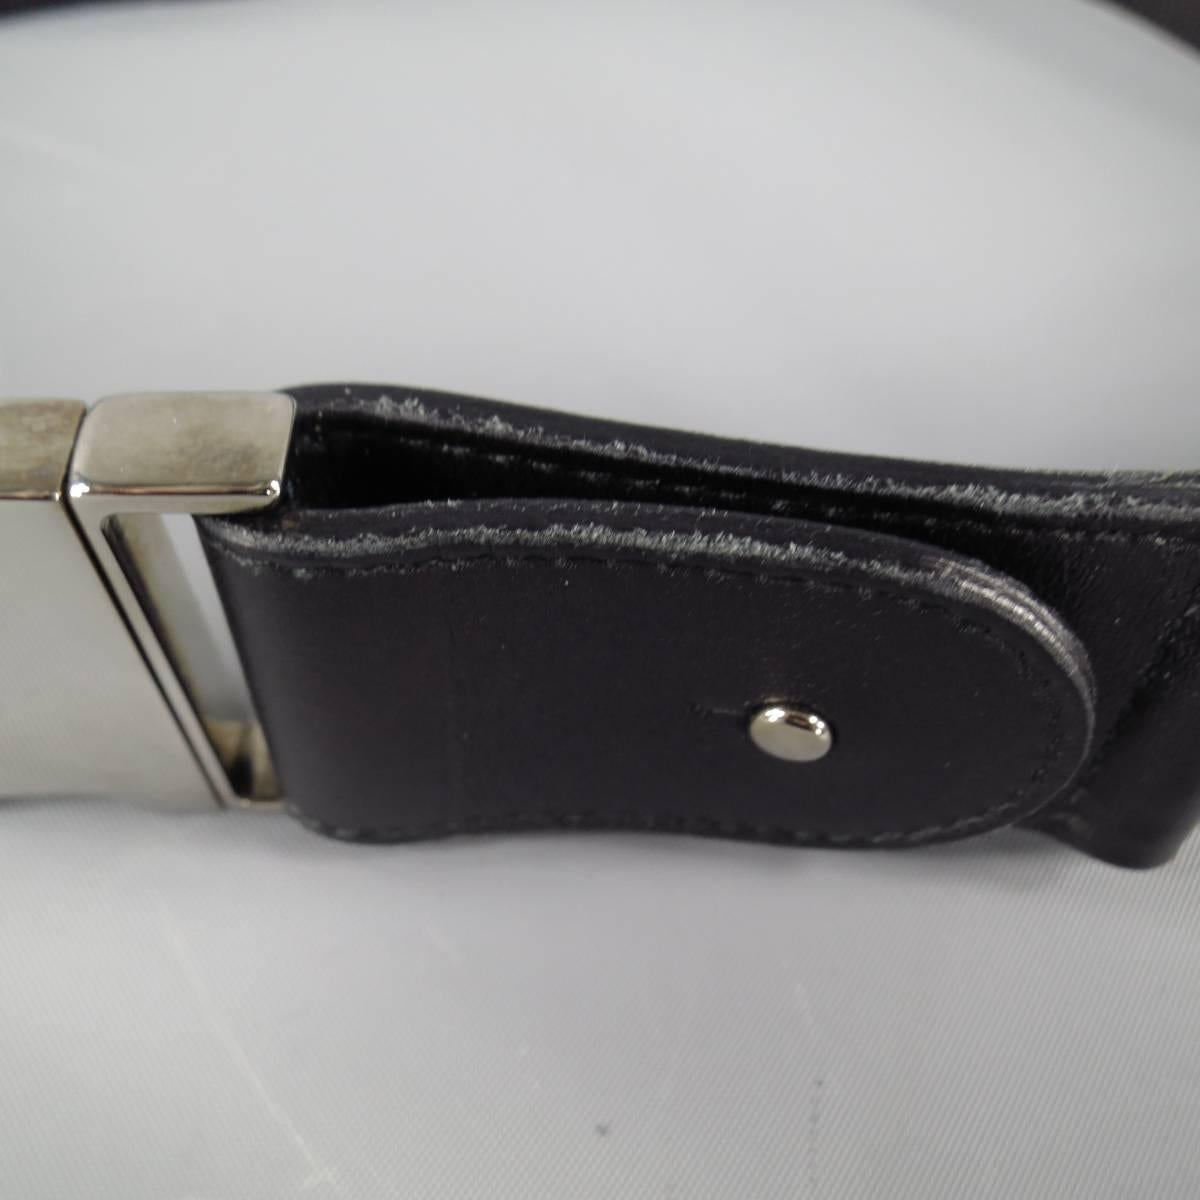 GUCCI elastic belt features utilitarian buckle design with leather accents and chrome shine hardware in Black, made in Italy.

Excellent Pre-Owned Condition    Marked: 34

Measurements: 

Length: 31 in. 
Width: 1.5 in.